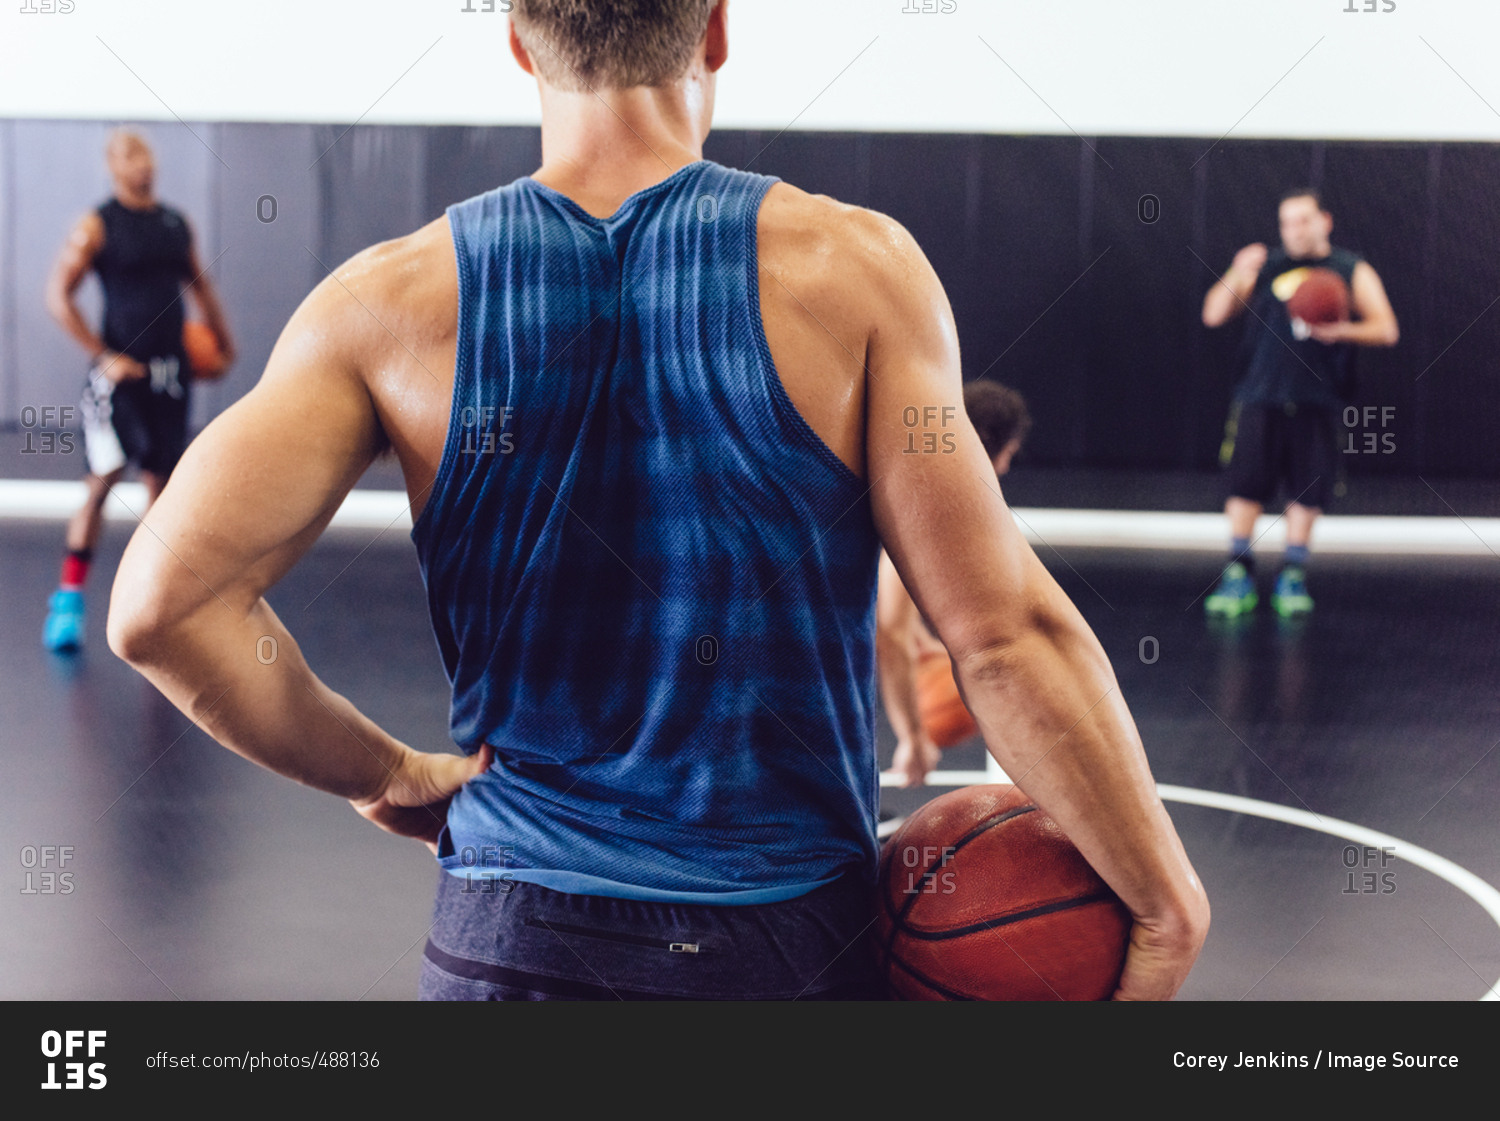 Rear view of male basketball player holding ball on court